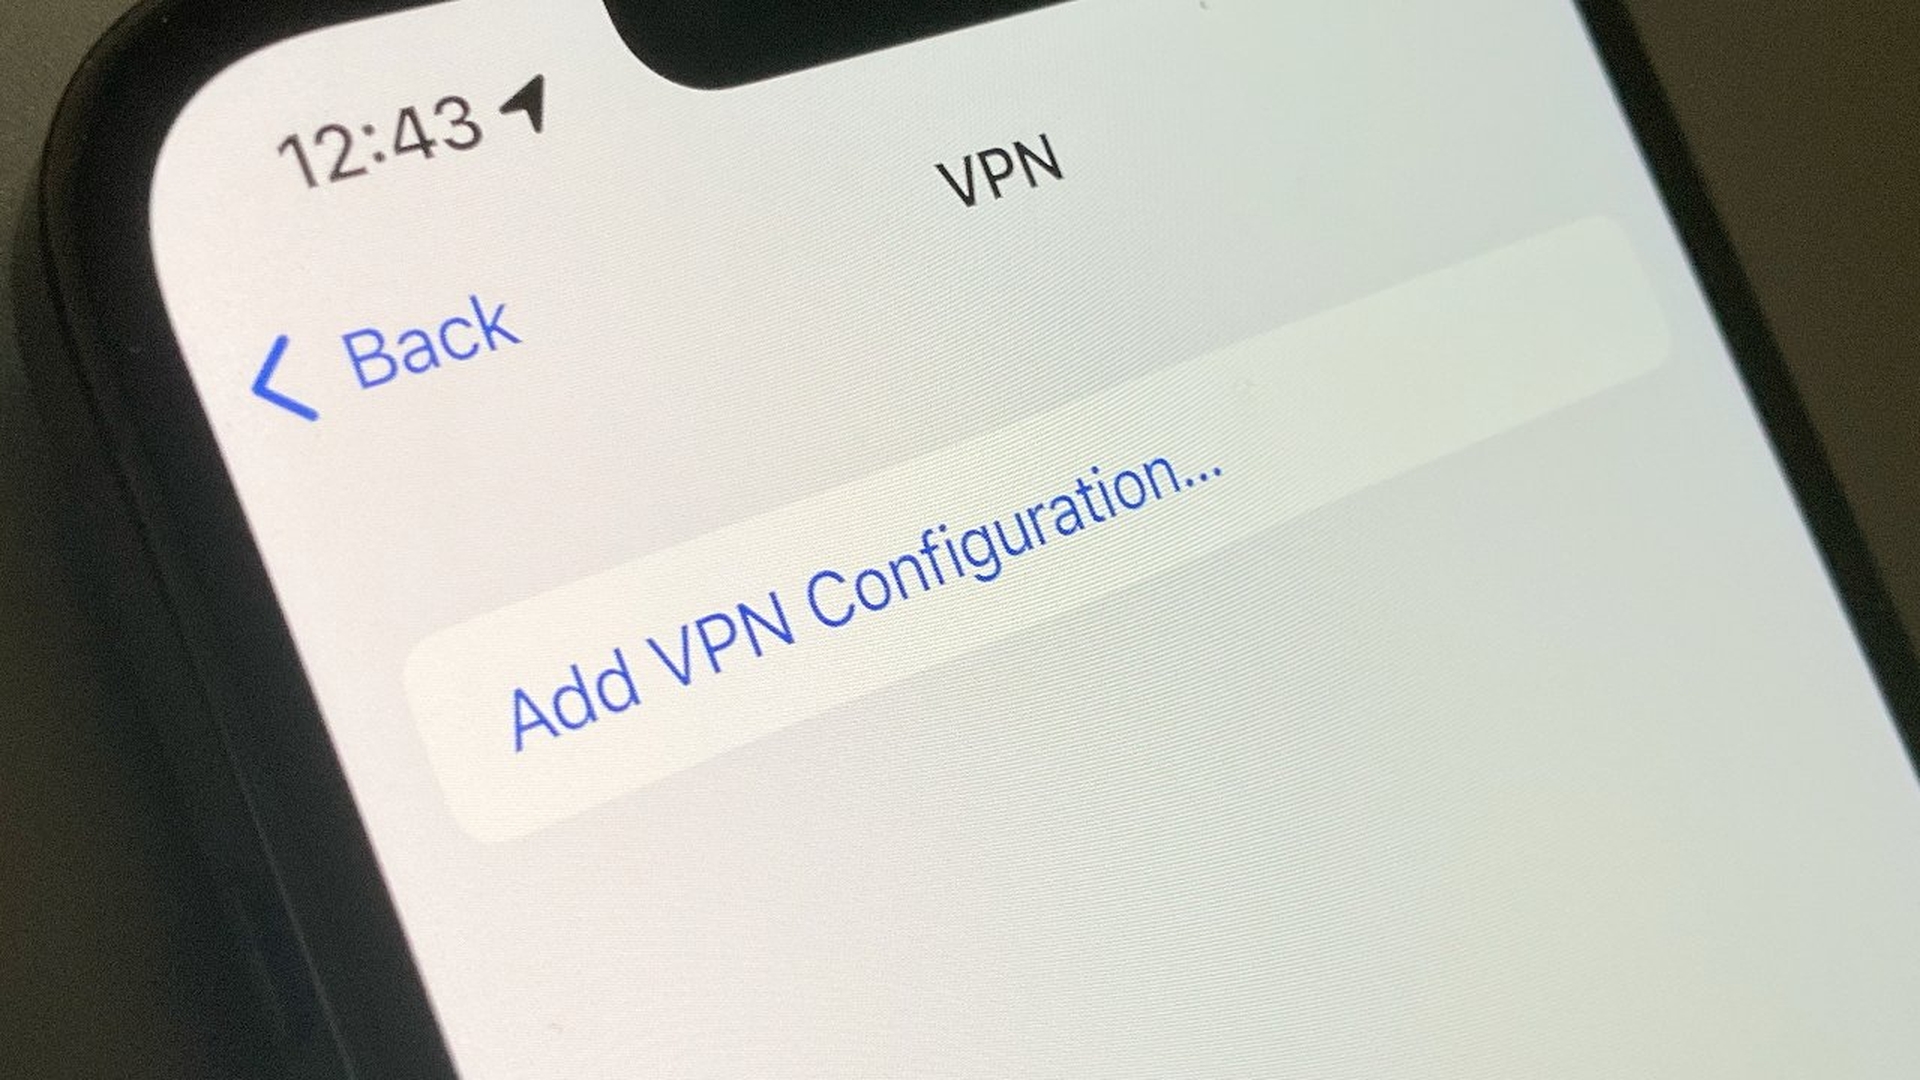 In this article, we are going to be covering the huge iOS privacy flaw showing that using VPN on iPhone isn't safe and has 2 major flaws making it a security liability. 